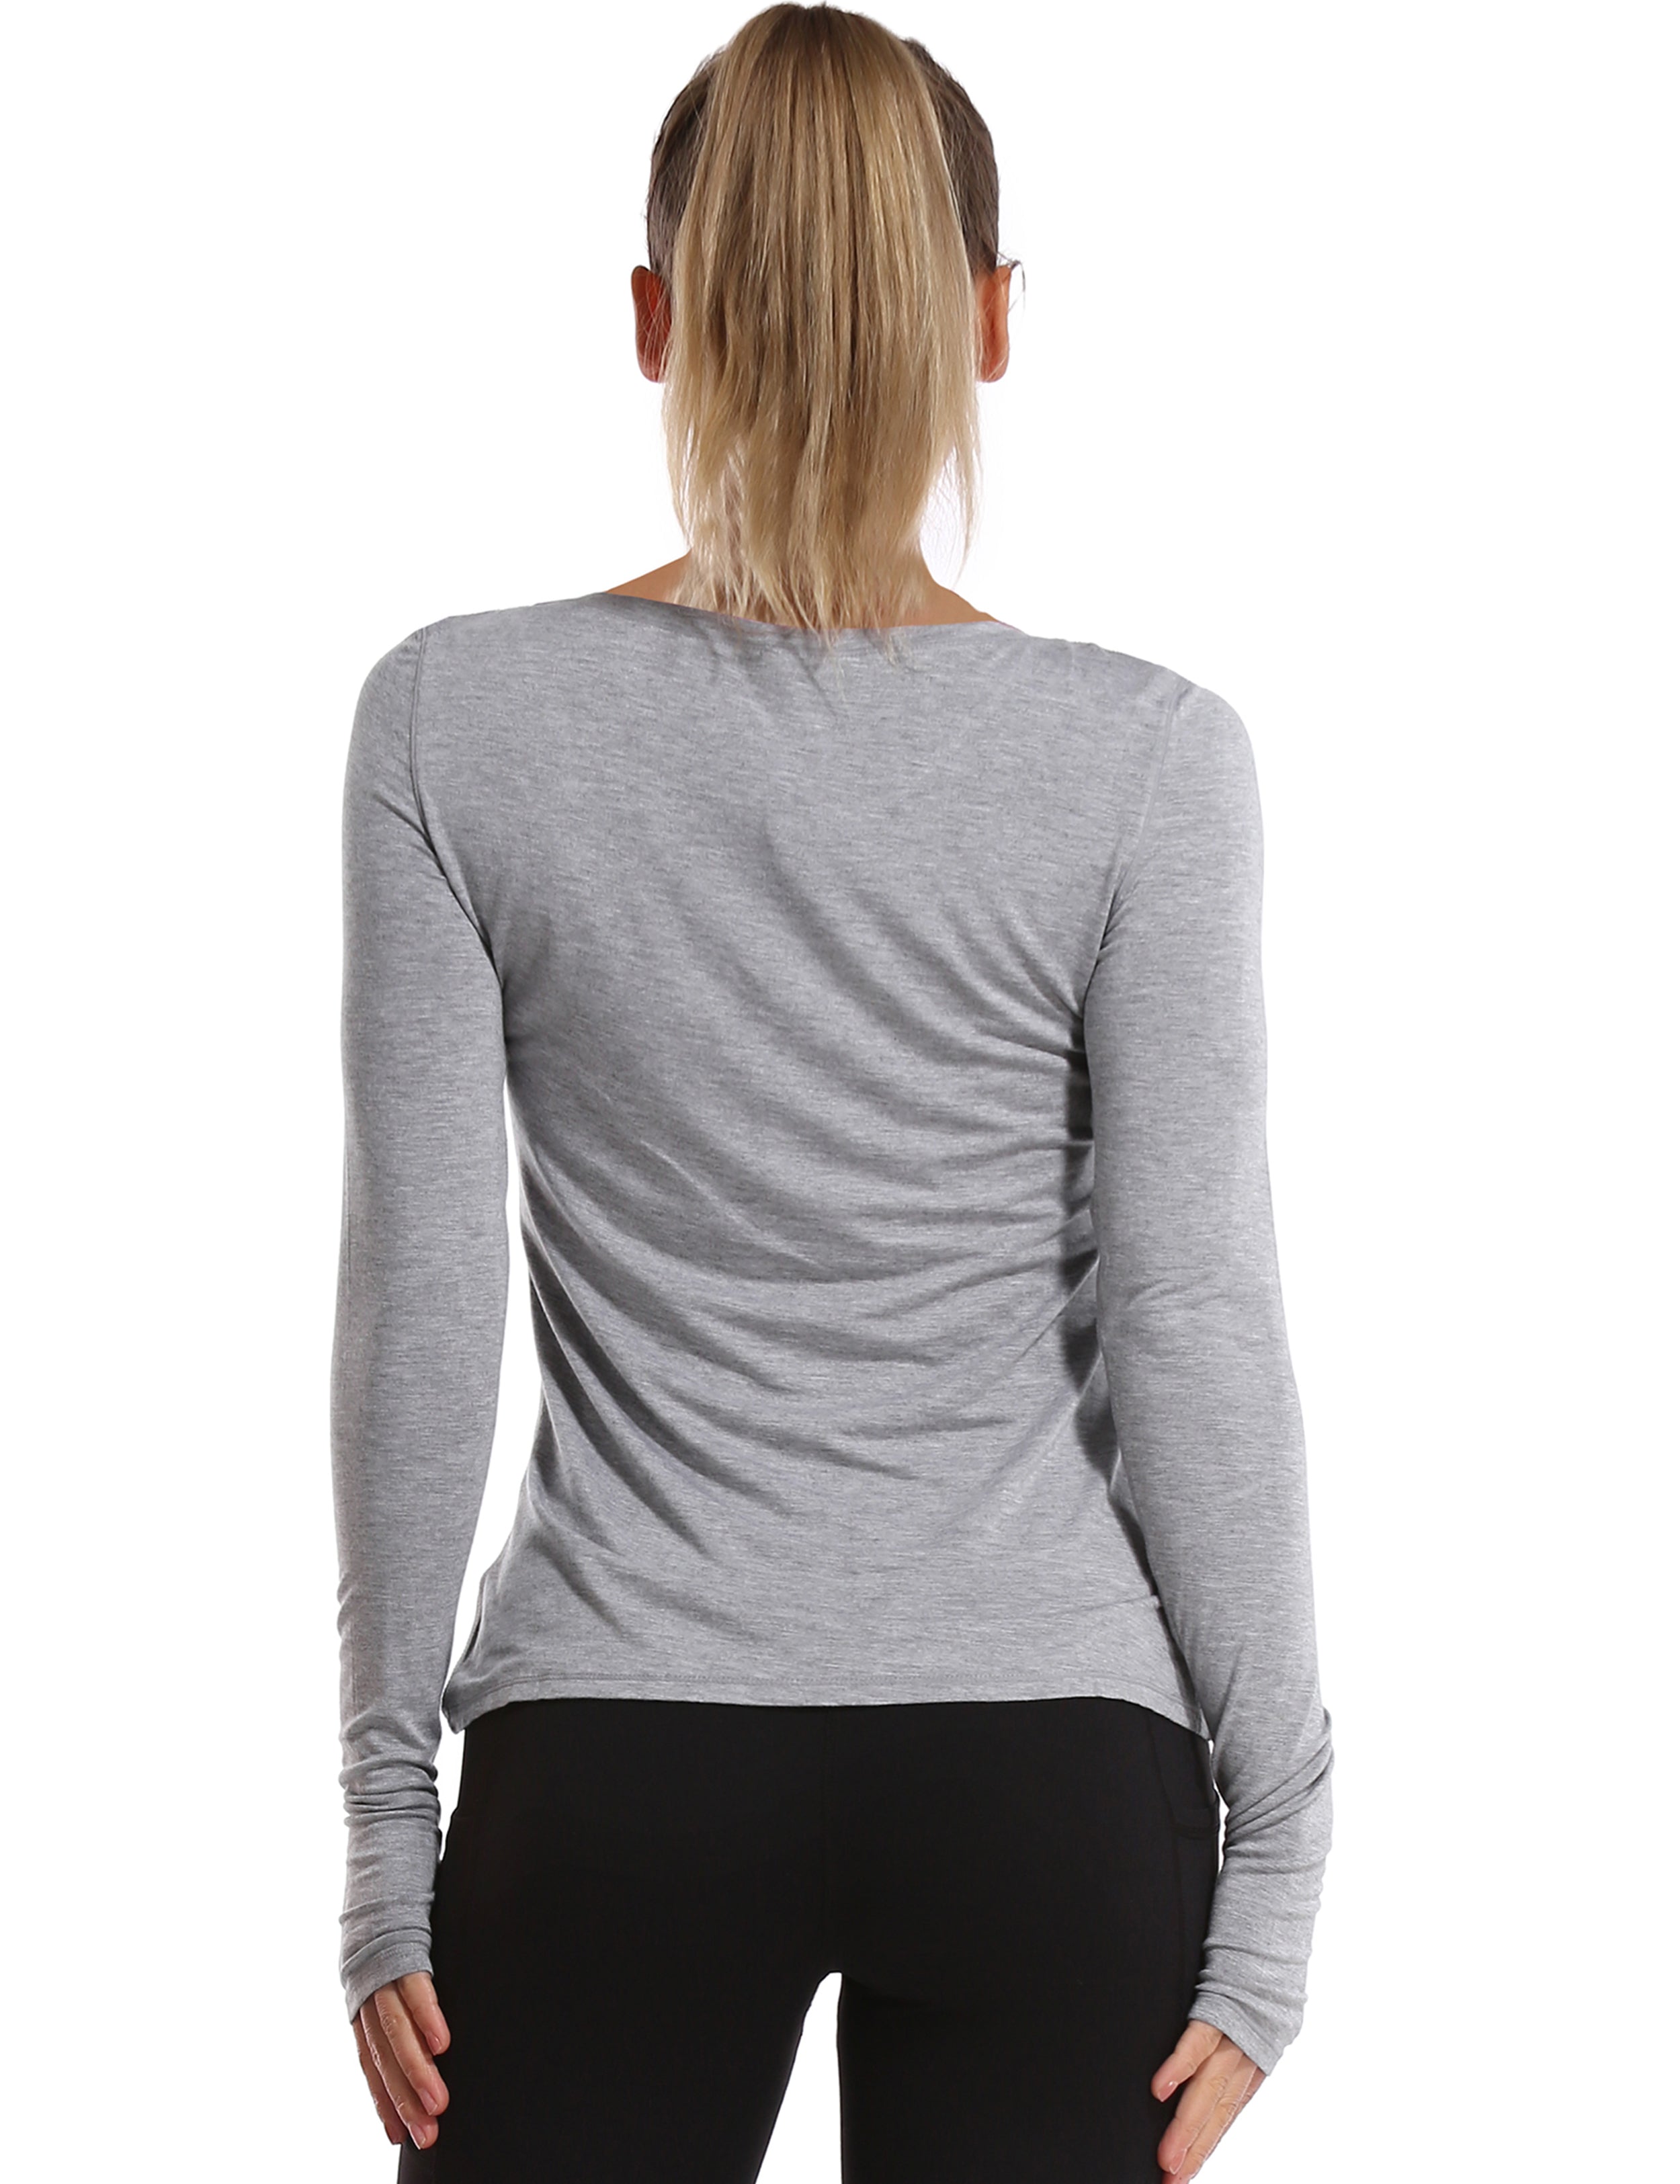 Athlete Long Sleeve Tops heathergray Designed for On the Move Slim fit 93%Modal/7%Spandex Four-way stretch Naturally breathable Super-Soft, Modal Fabric